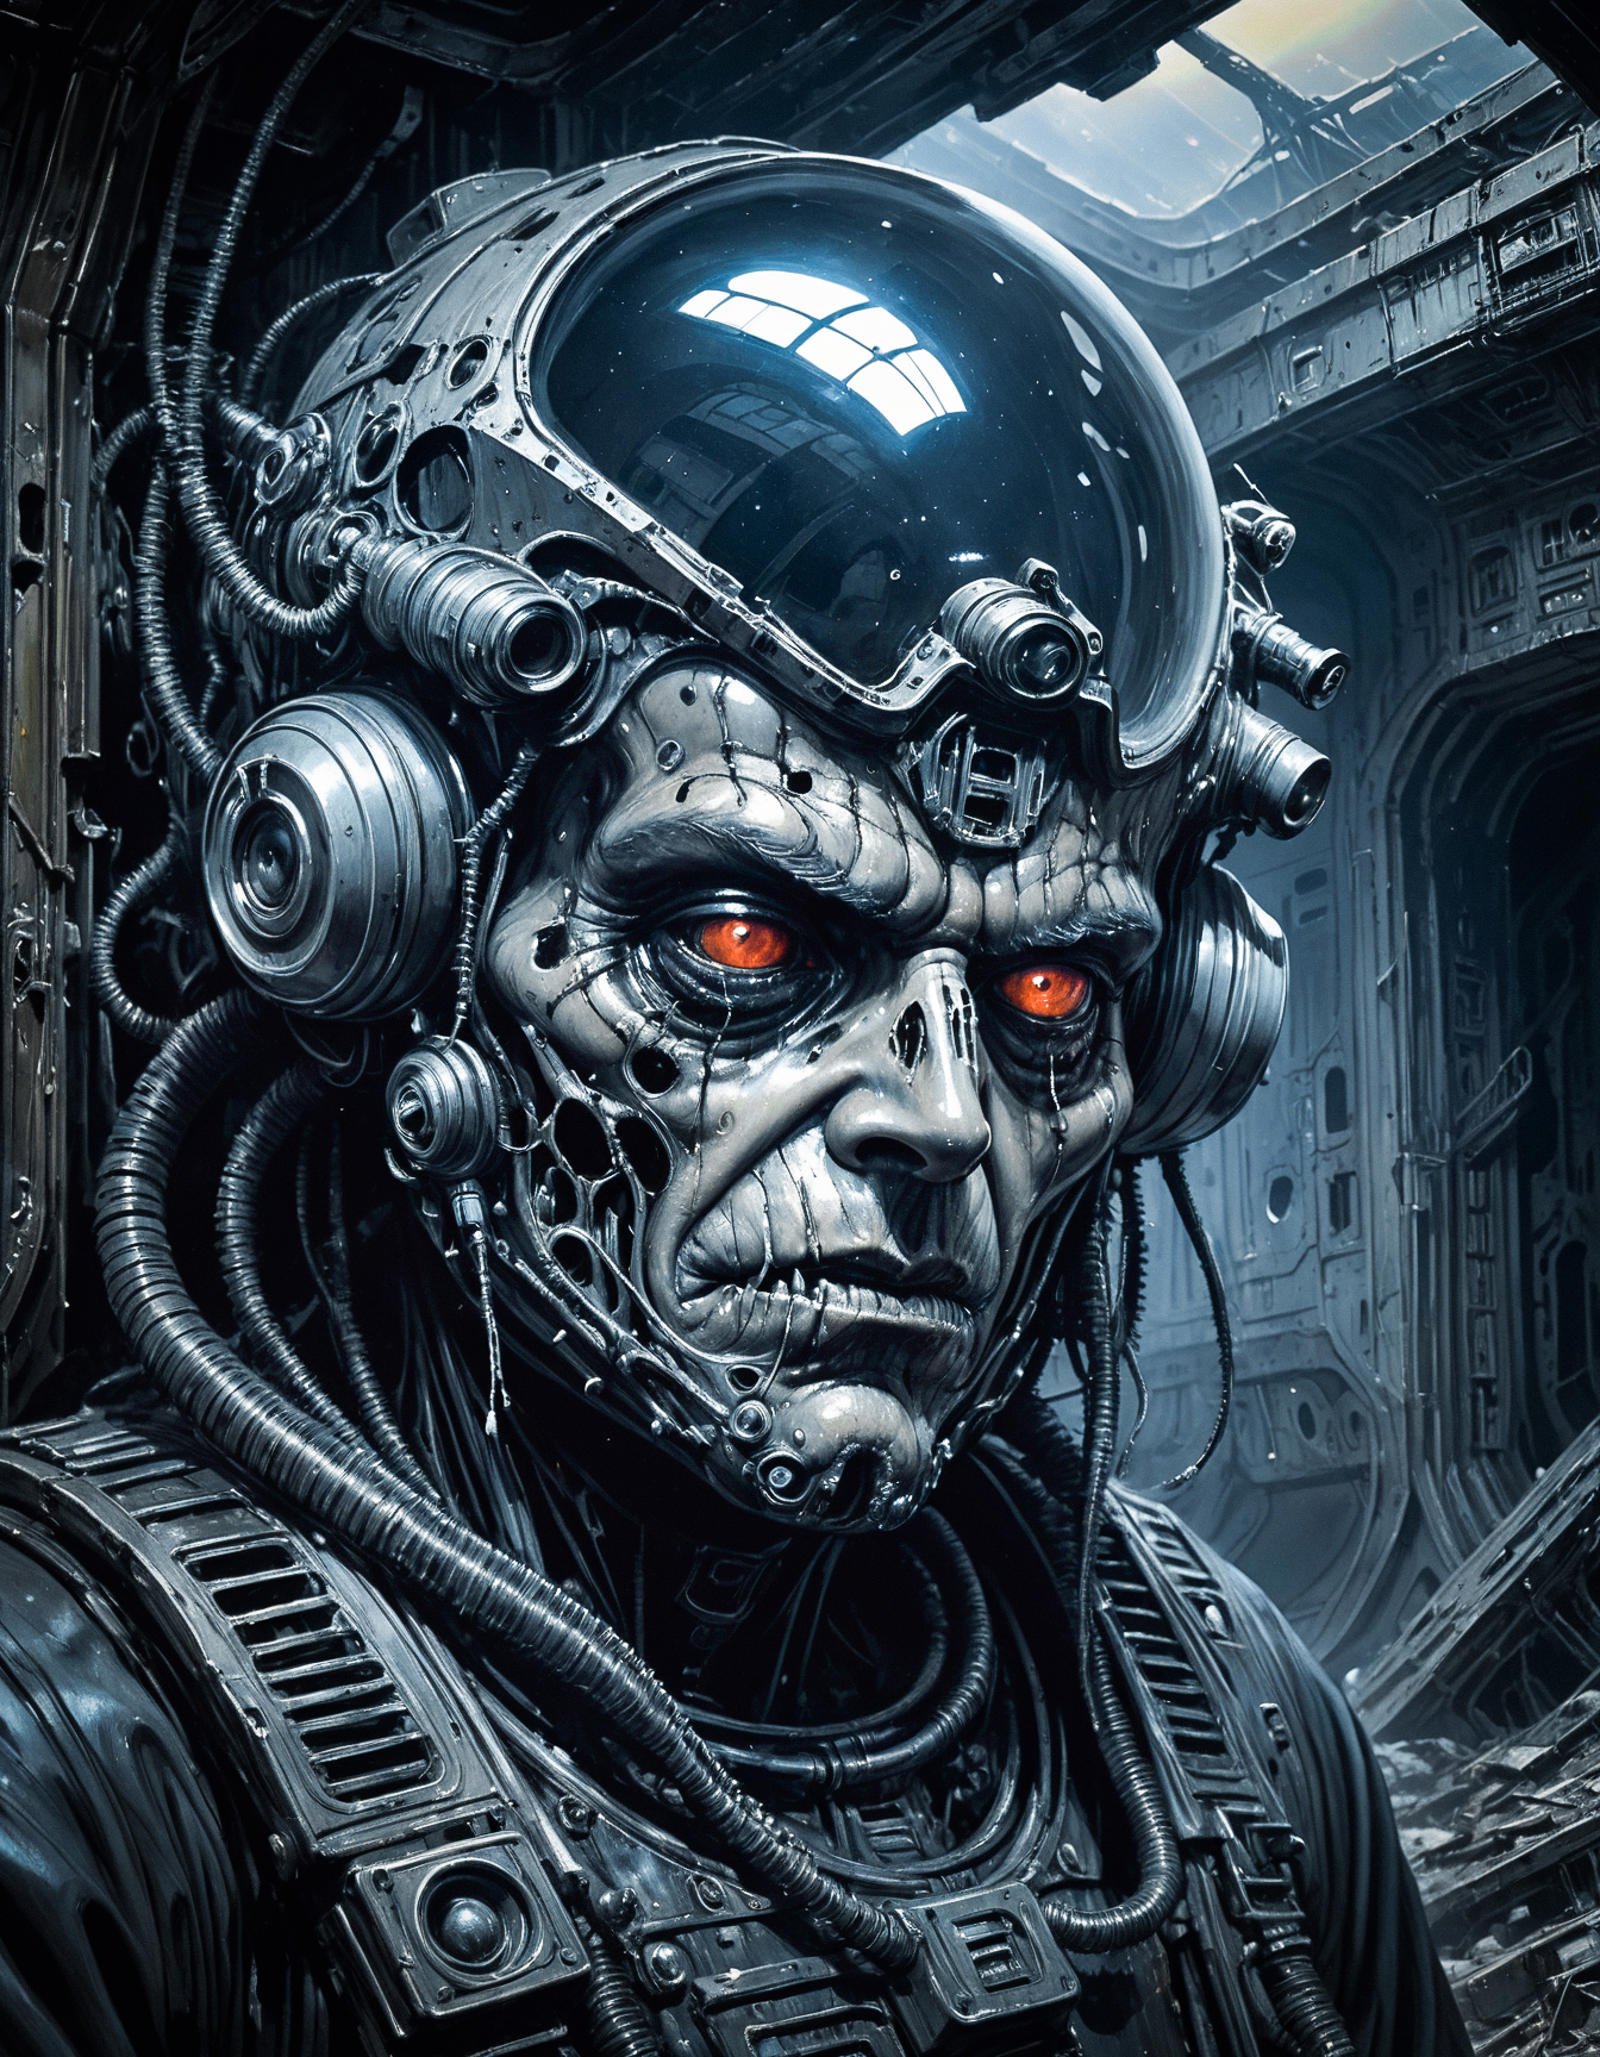 A cyborg with red eyes and a futuristic helmet, surrounded by wires and machinery.